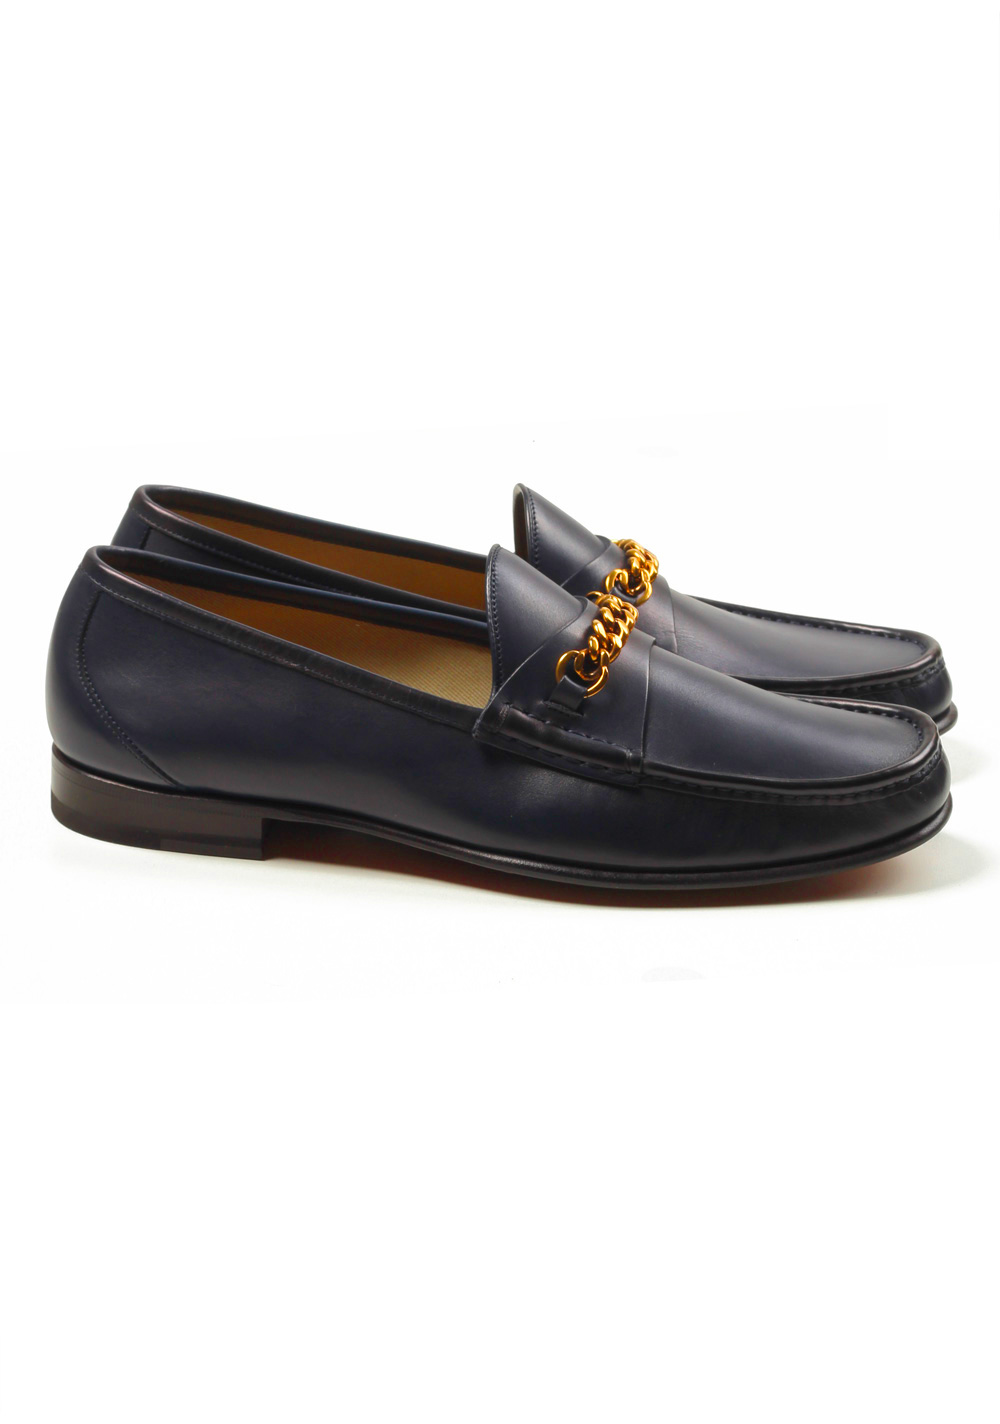 TOM FORD York Blue Leather Chain Loafers Shoes Size 10,5 UK / 11,5 U.S. | Costume Limité